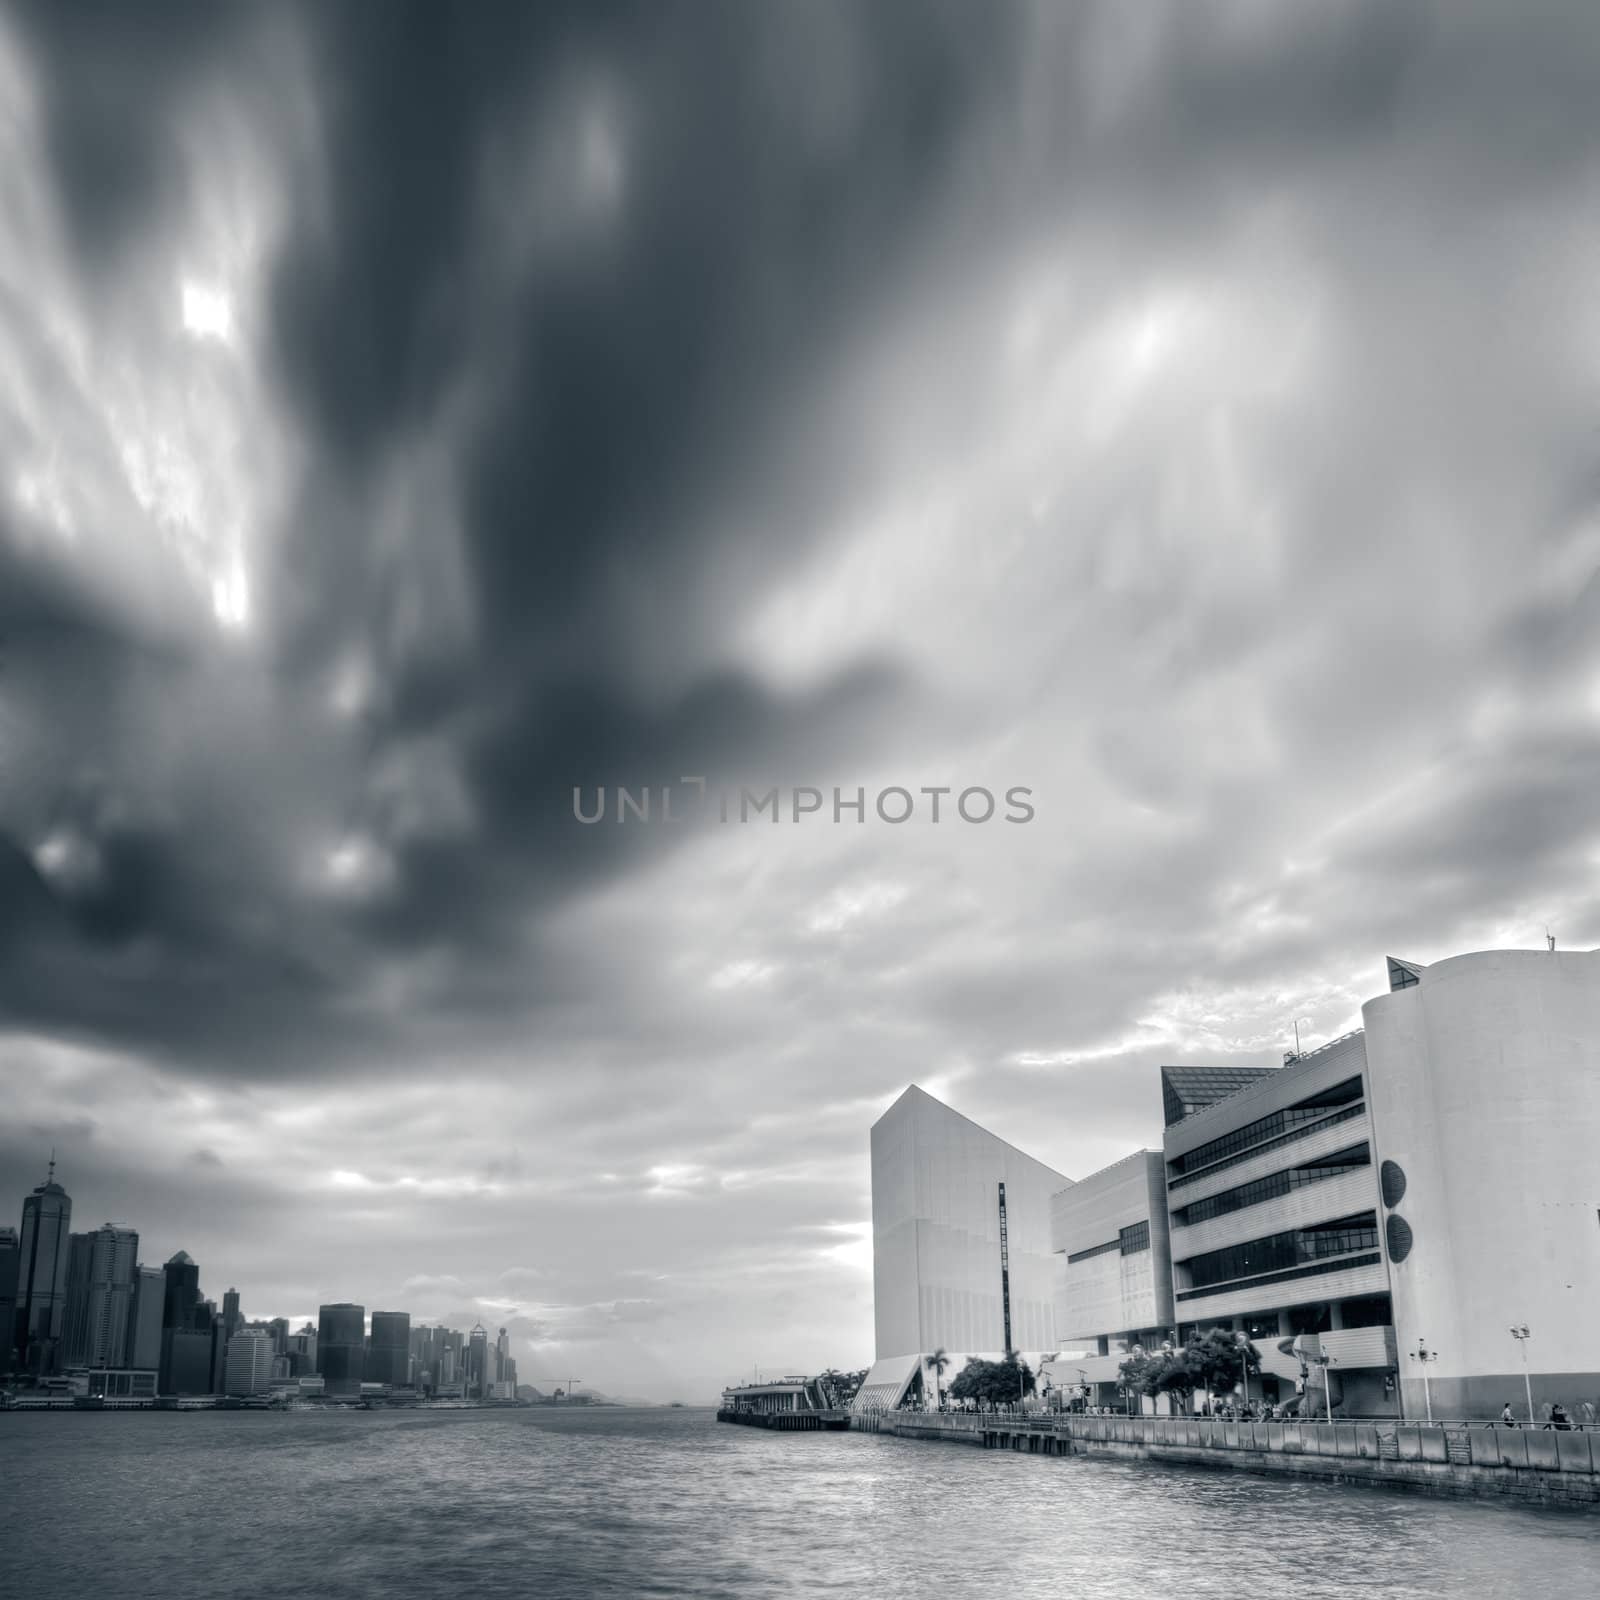 Cityscape of dramatic clouds motion near the bay in Hong Kkong.